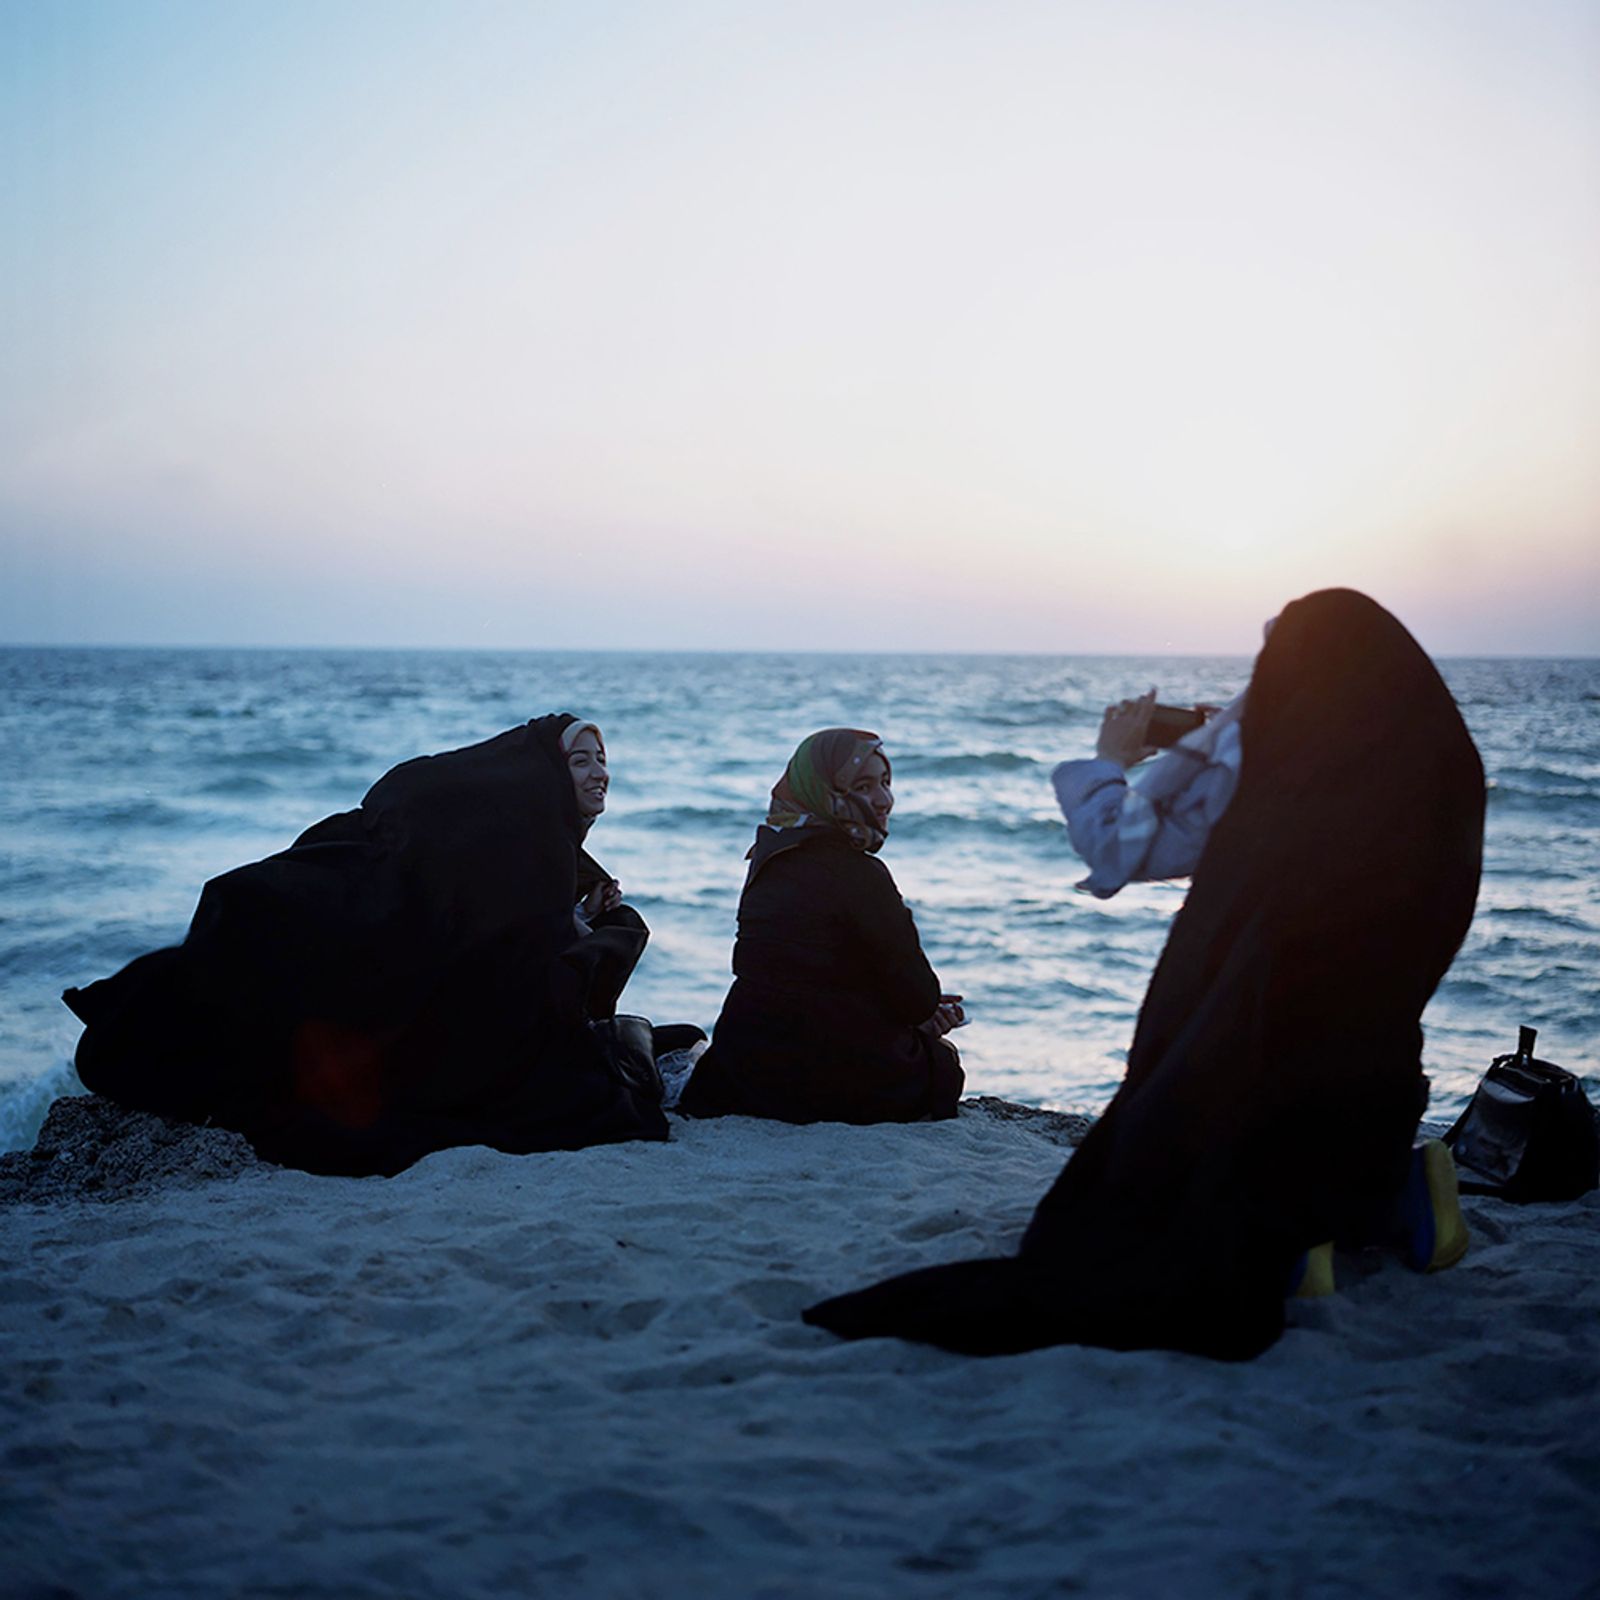 © Loulou d’Aki - Down by the water, Iranian girls in chador take pictures of each other at sunset on Kish island.